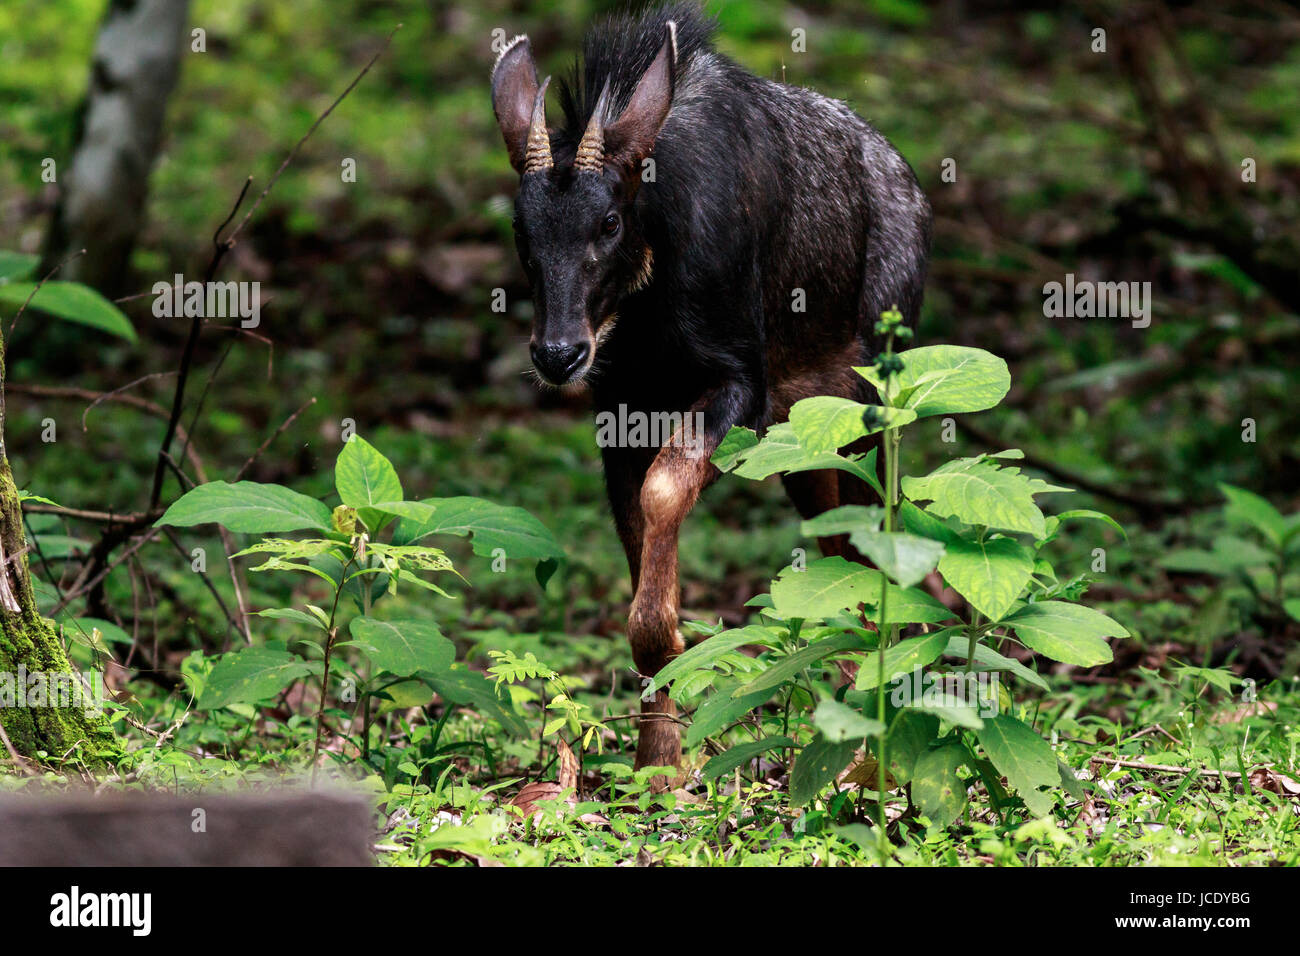 behaviors of serow in the forest of thailand Stock Photo